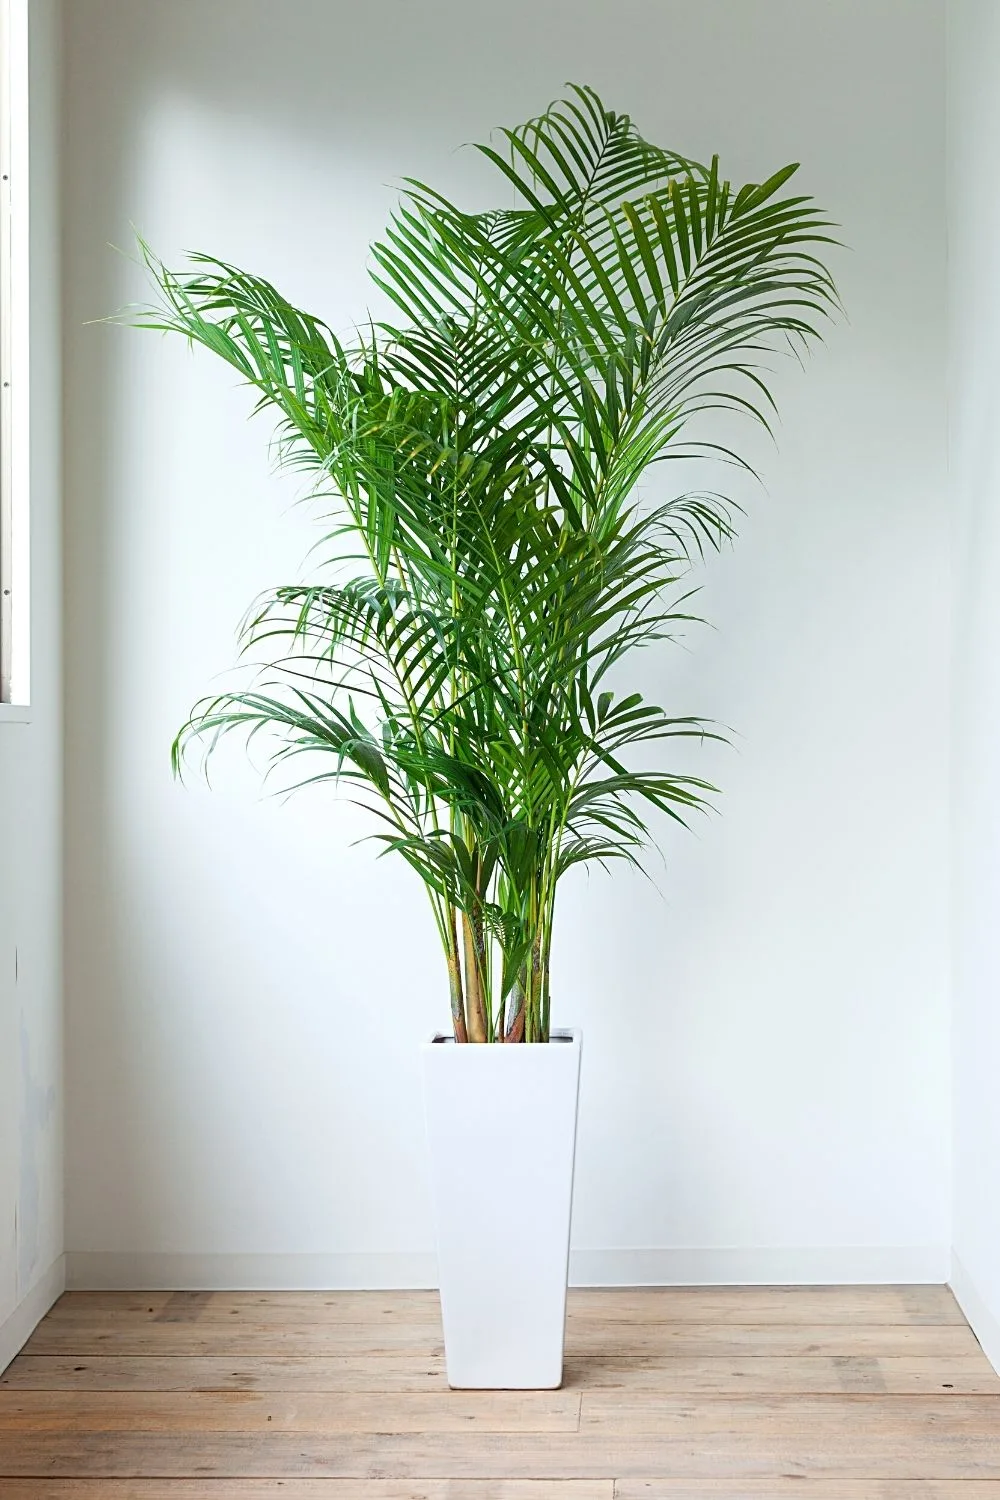 Also known as the Golden Cane Palm or Butterfly's Palm, the Areca Palm is another great addition to grace your southwest-facing window